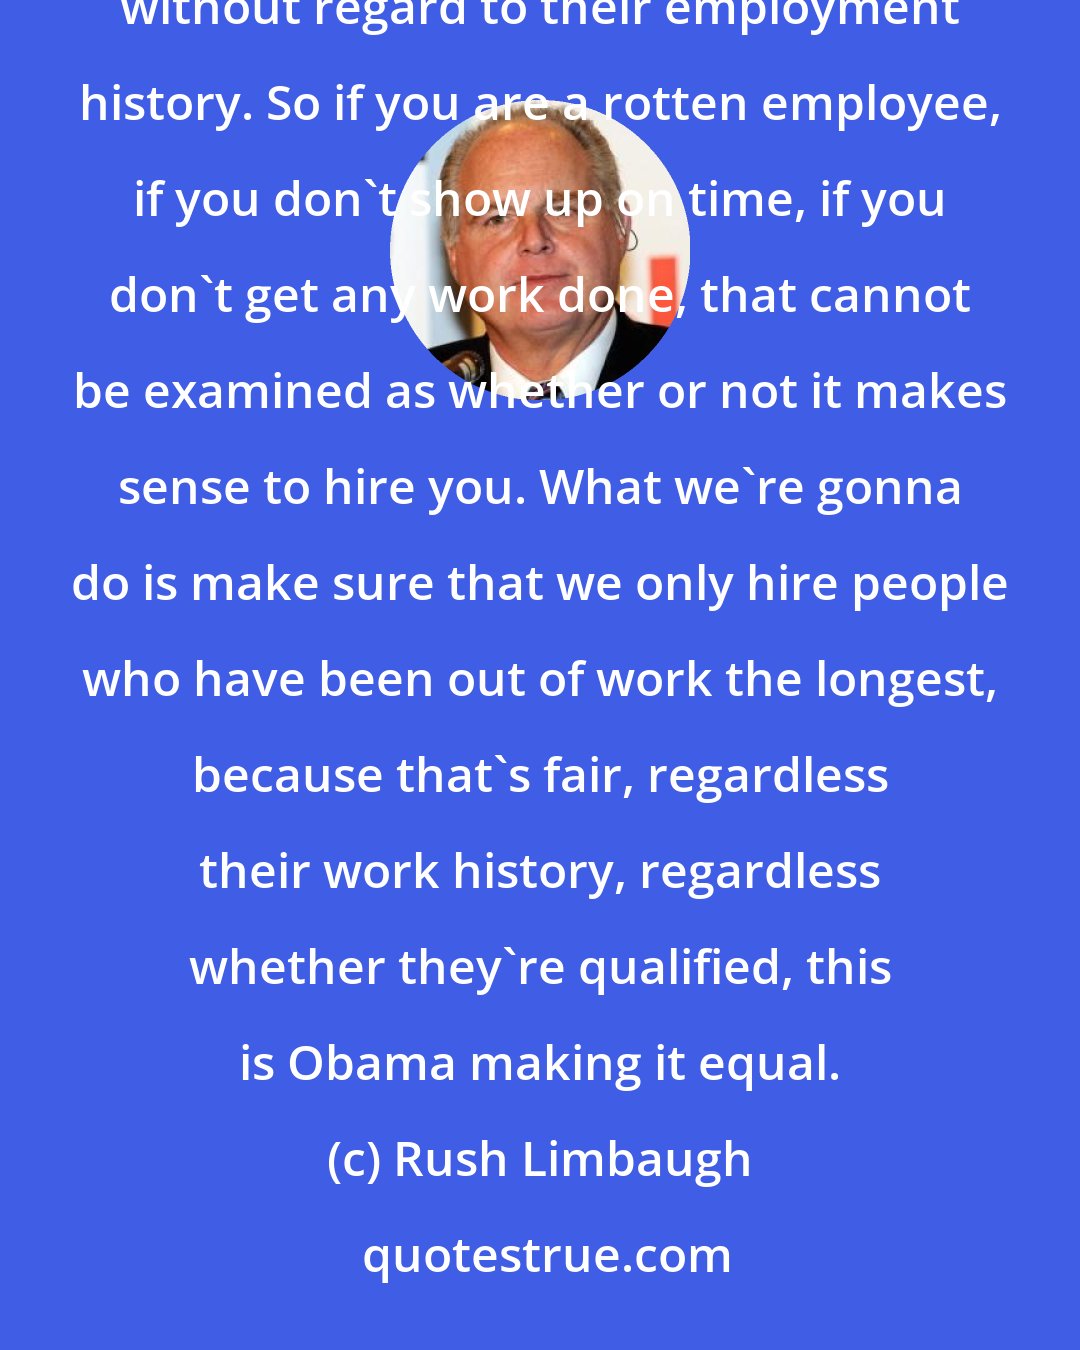 Rush Limbaugh: Barack Obama today is directing every federal agency to make sure we evaluate candidates on the level without regard to their employment history. So if you are a rotten employee, if you don't show up on time, if you don't get any work done, that cannot be examined as whether or not it makes sense to hire you. What we're gonna do is make sure that we only hire people who have been out of work the longest, because that's fair, regardless their work history, regardless whether they're qualified, this is Obama making it equal.